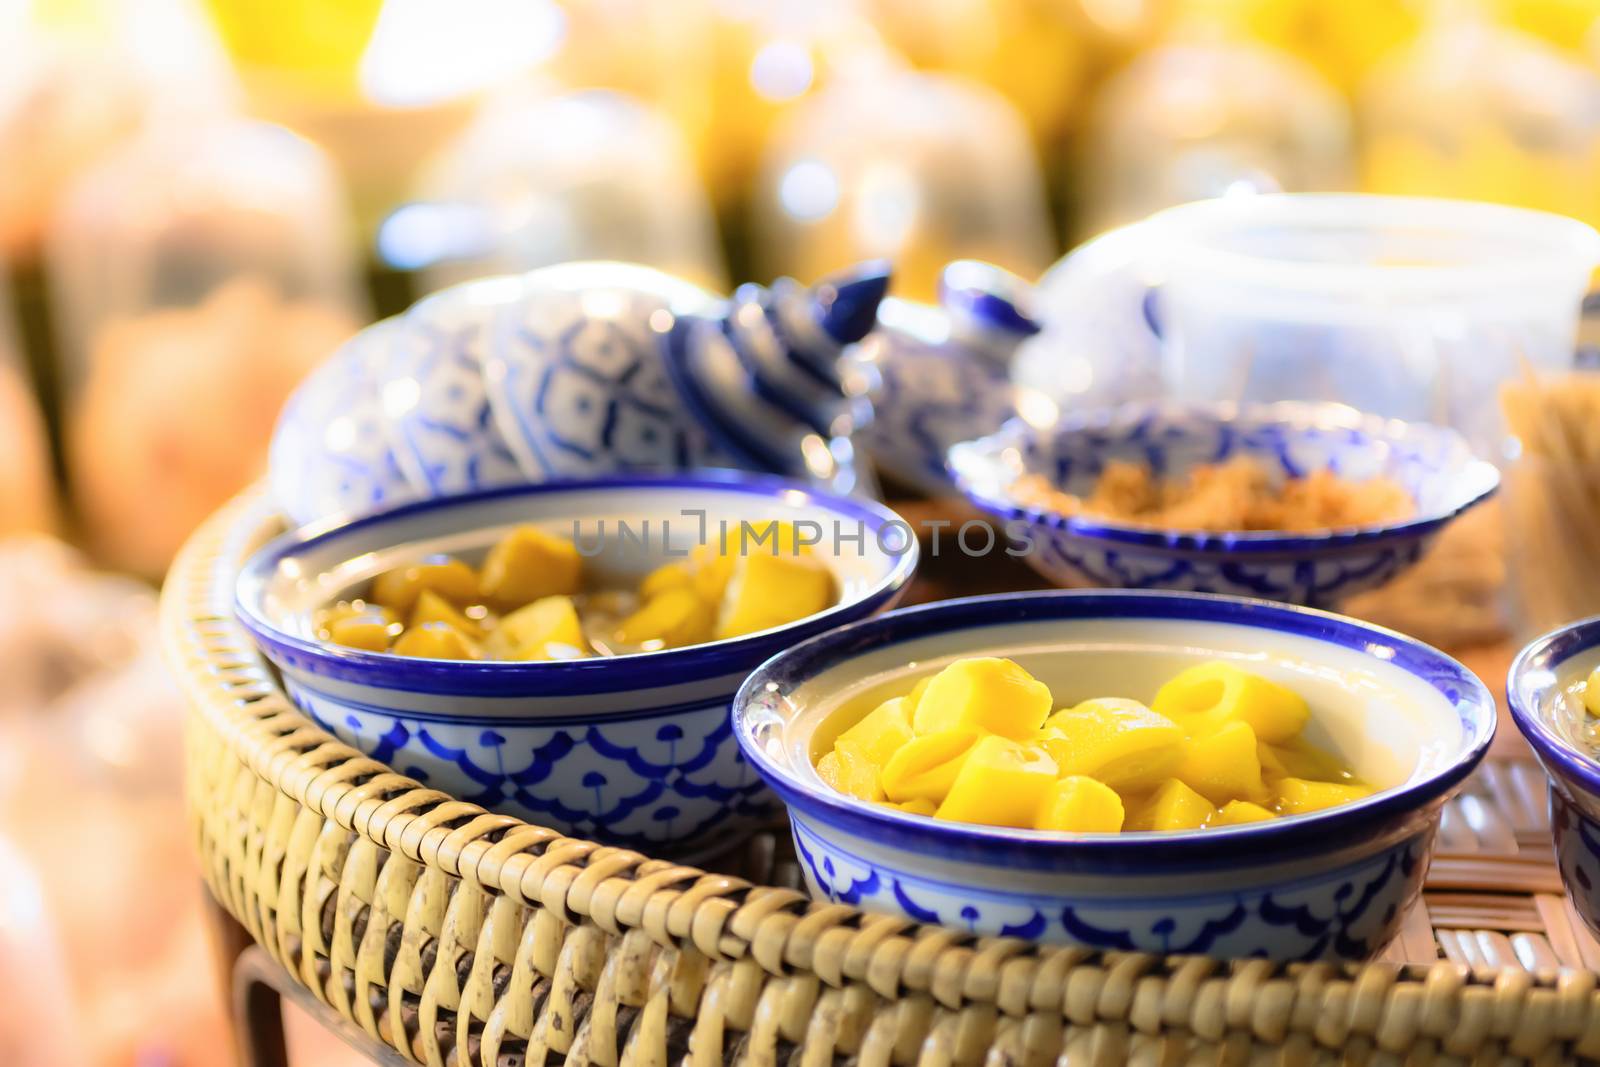 Preserved vegetables and fruits in vintage bowl by ahimaone